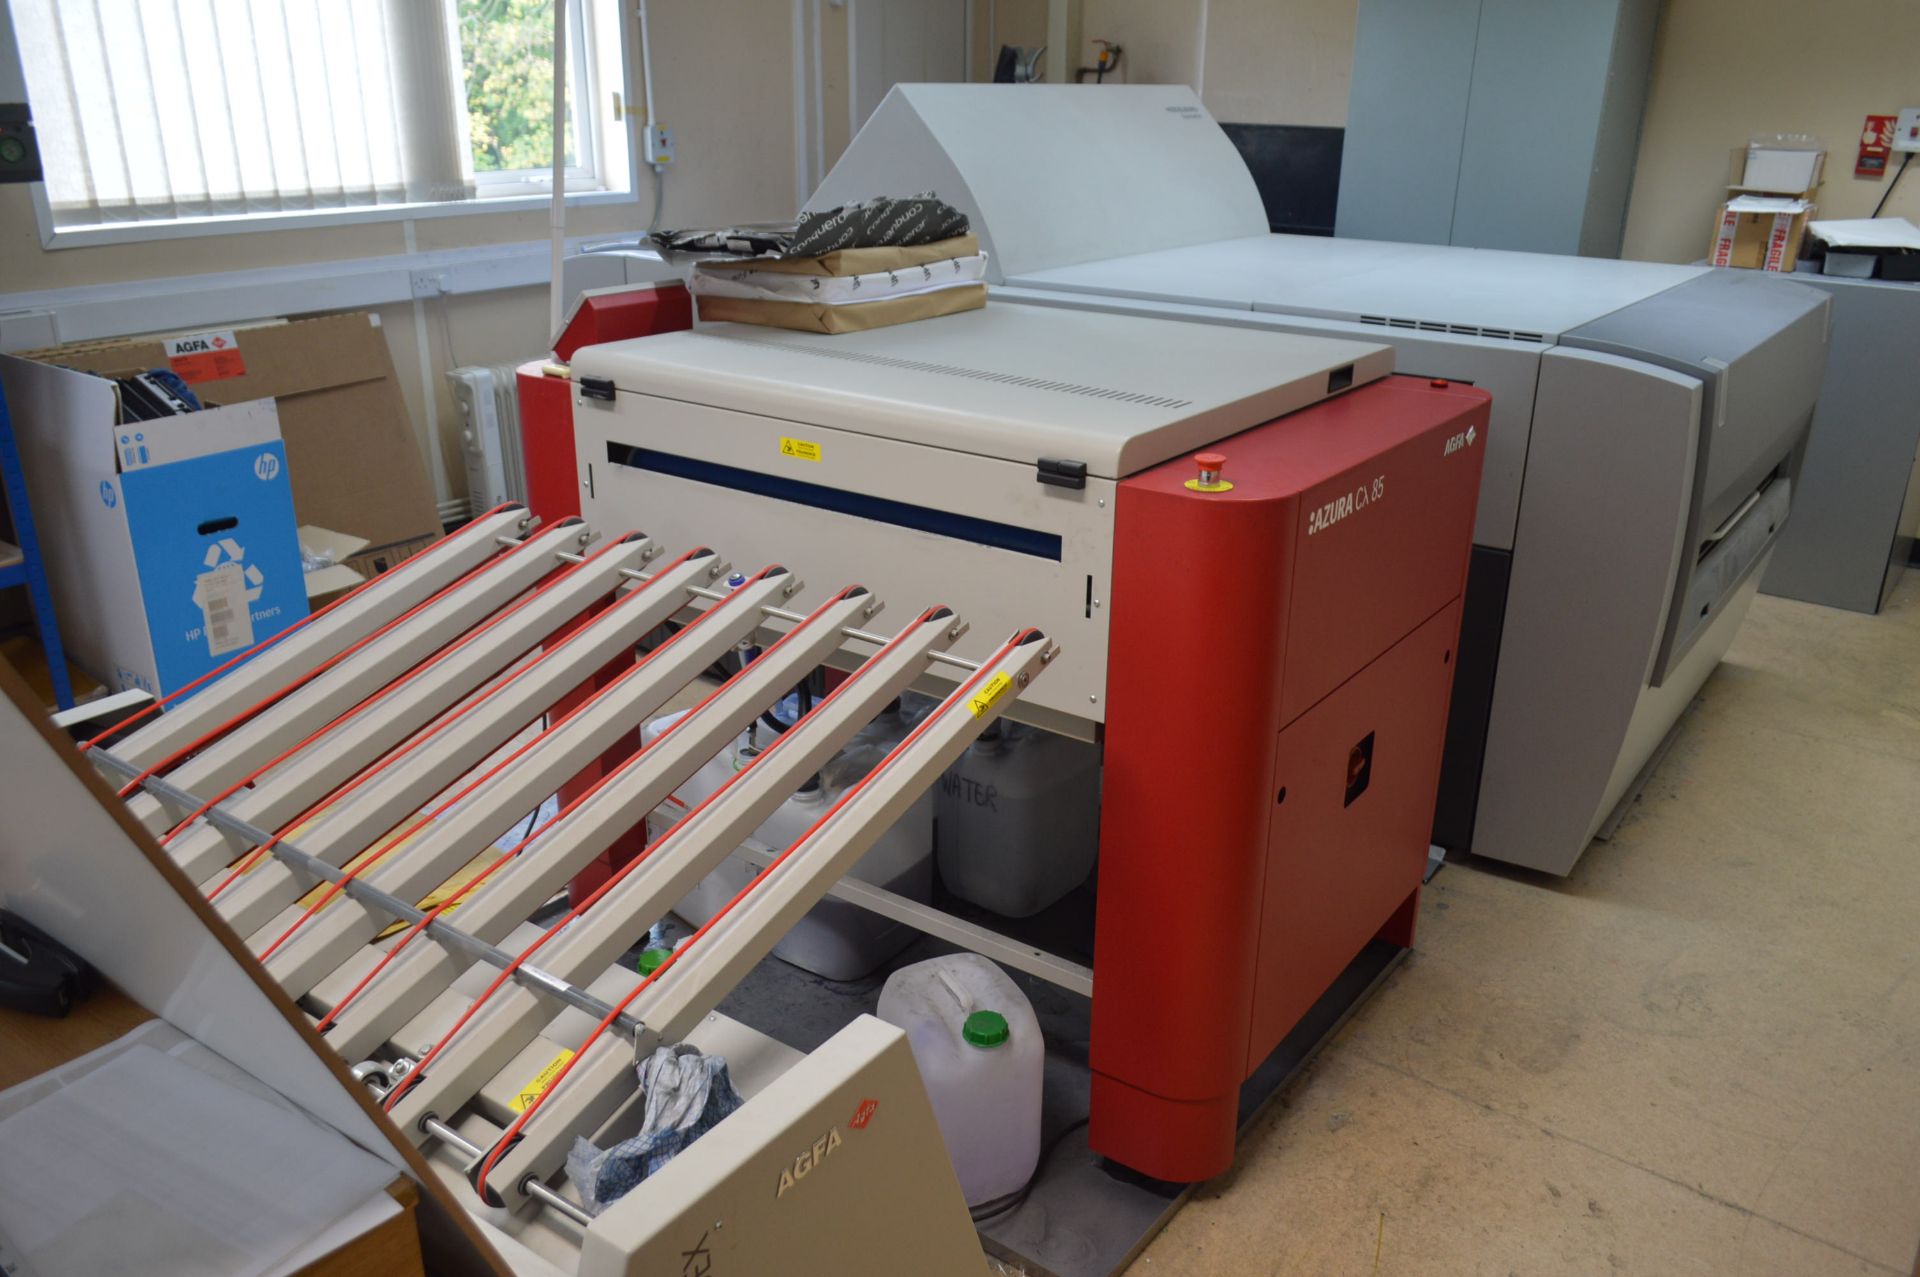 Heidelberg SUPRASETTER CTP IMAGE SETTER, Age. 2006, no. PL.517.0501, with Agfa Azura CX85 washer,